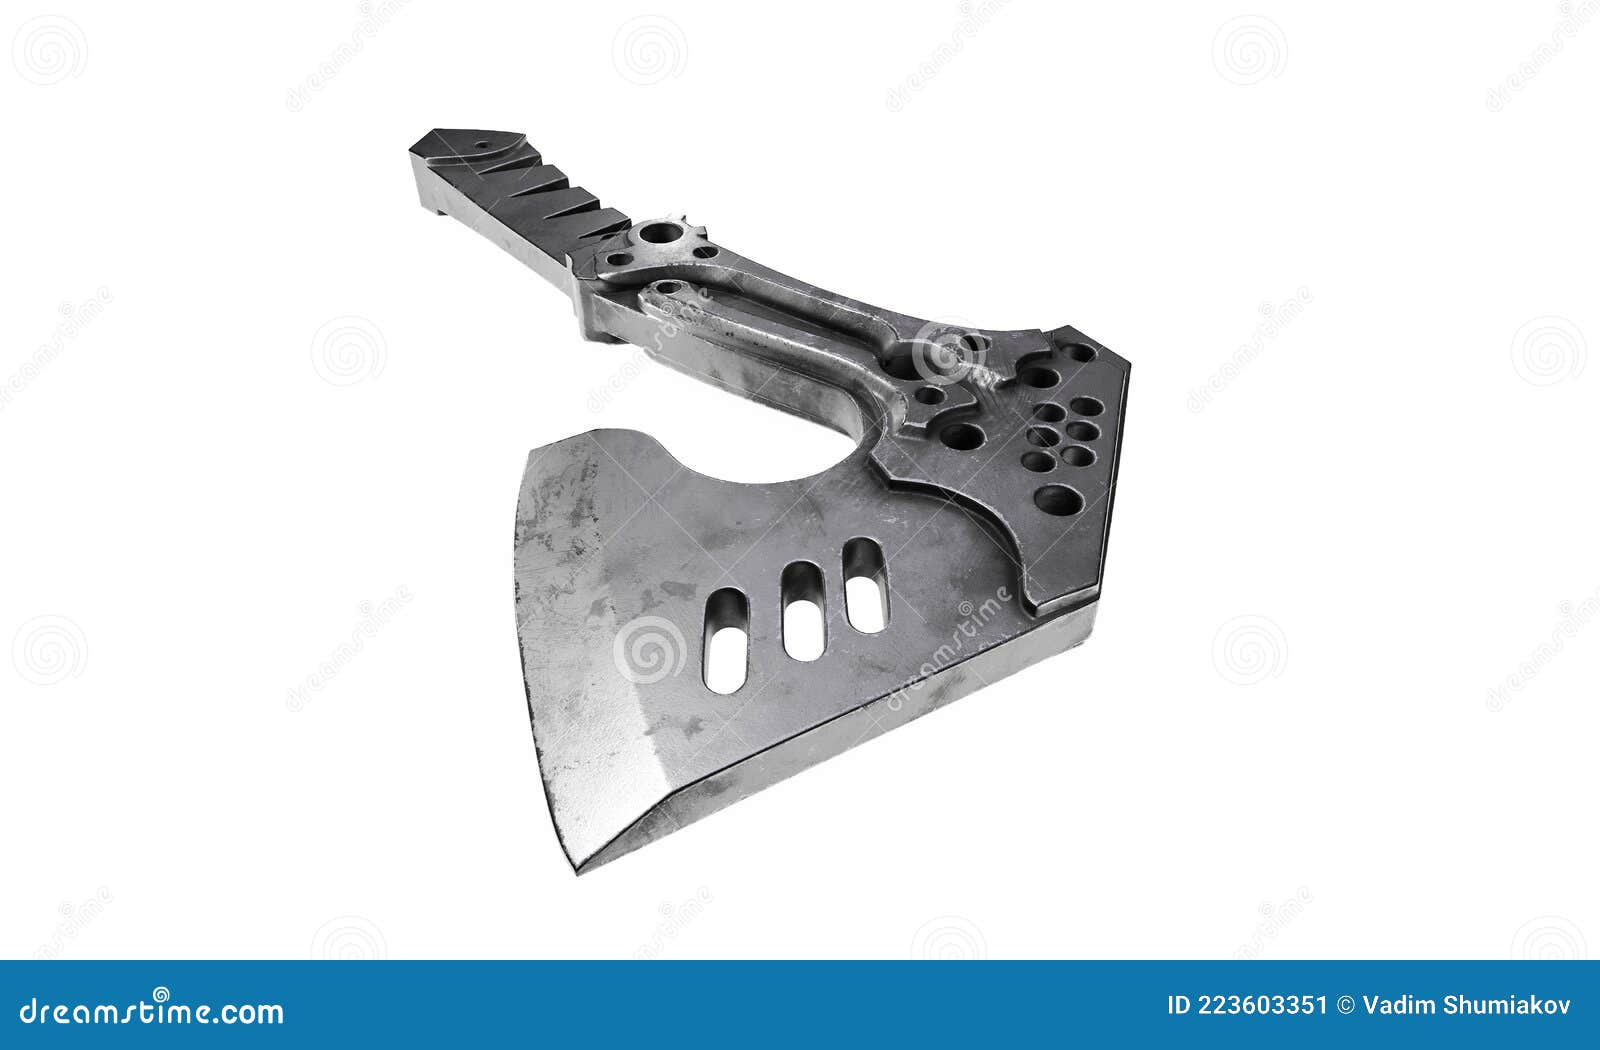 tactical ax 3d  render in white background